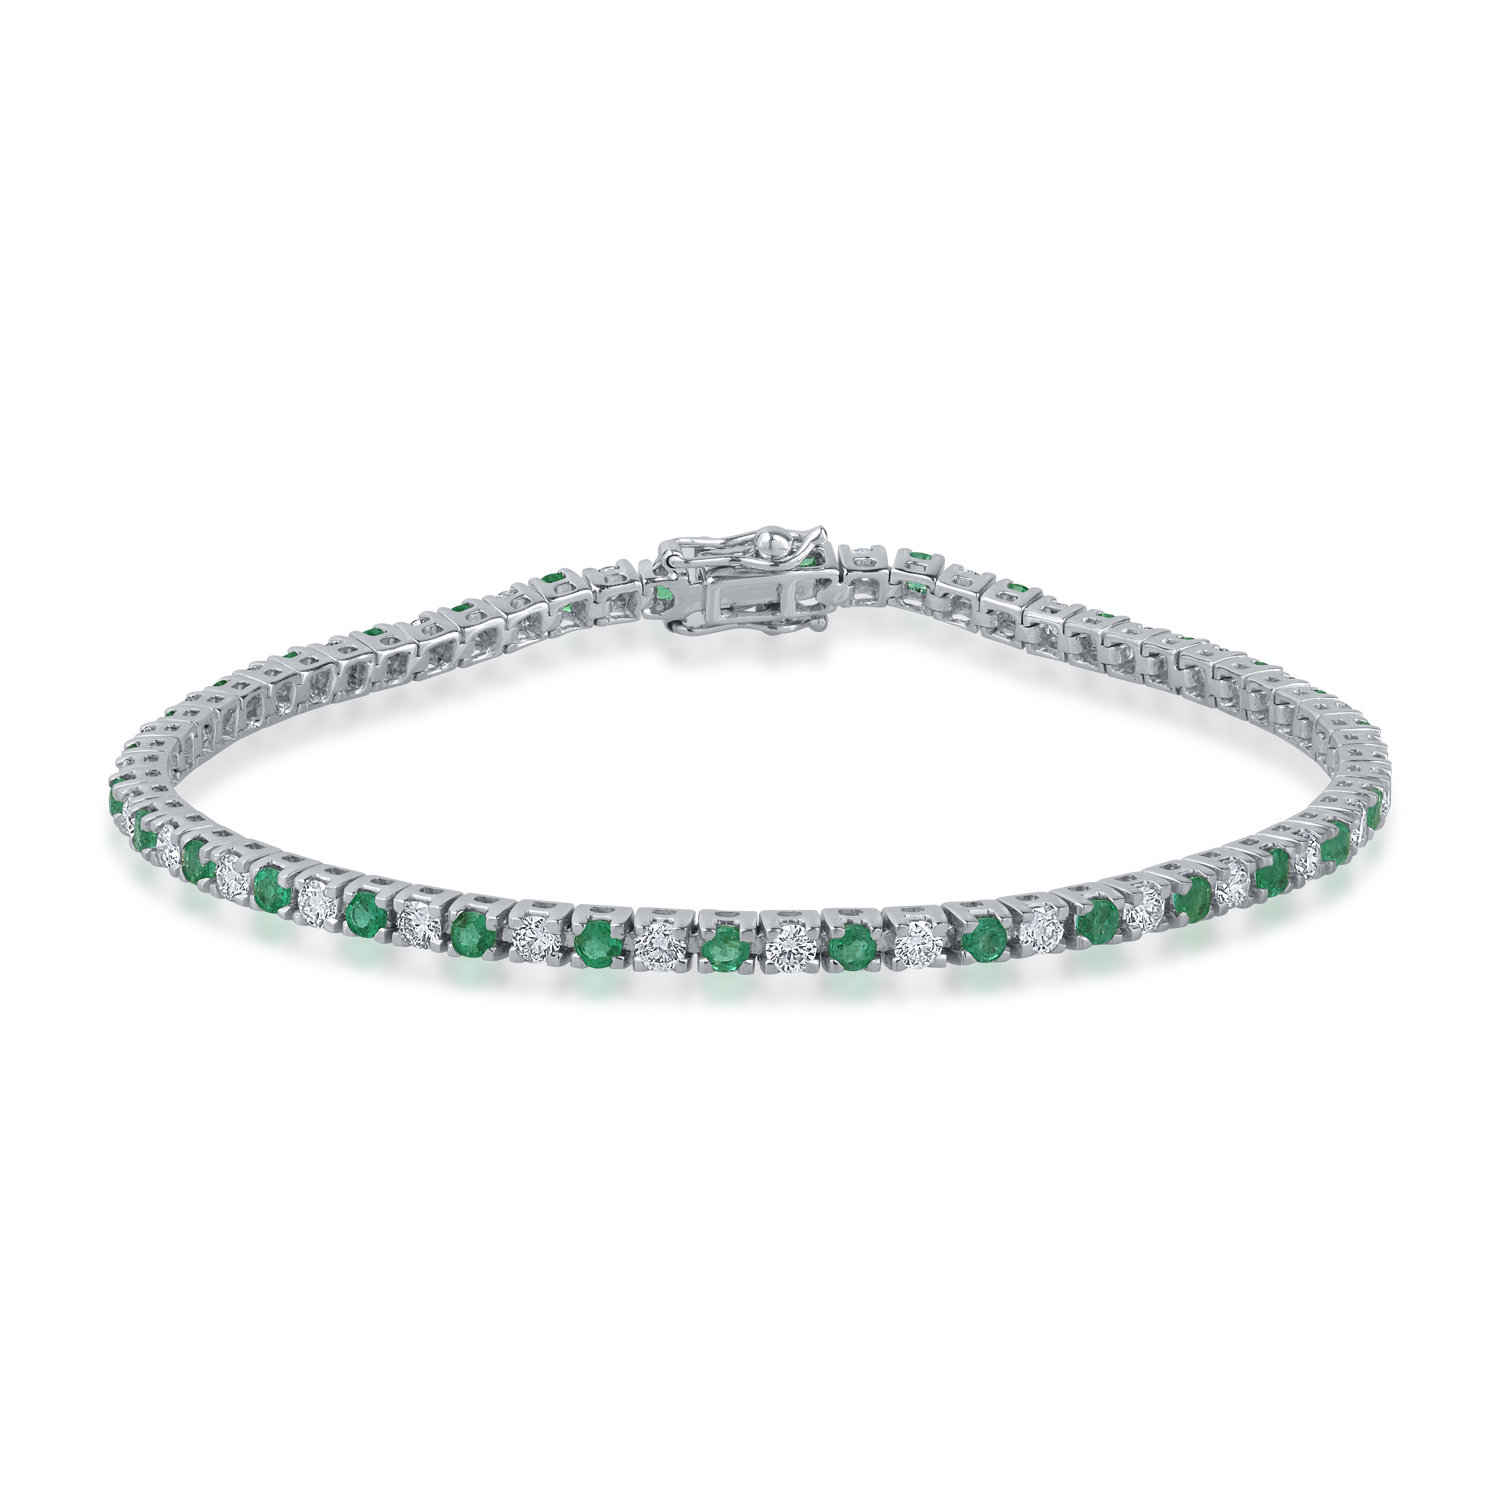 White gold tennis bracelet with 1.85ct diamonds and 1.71ct emeralds